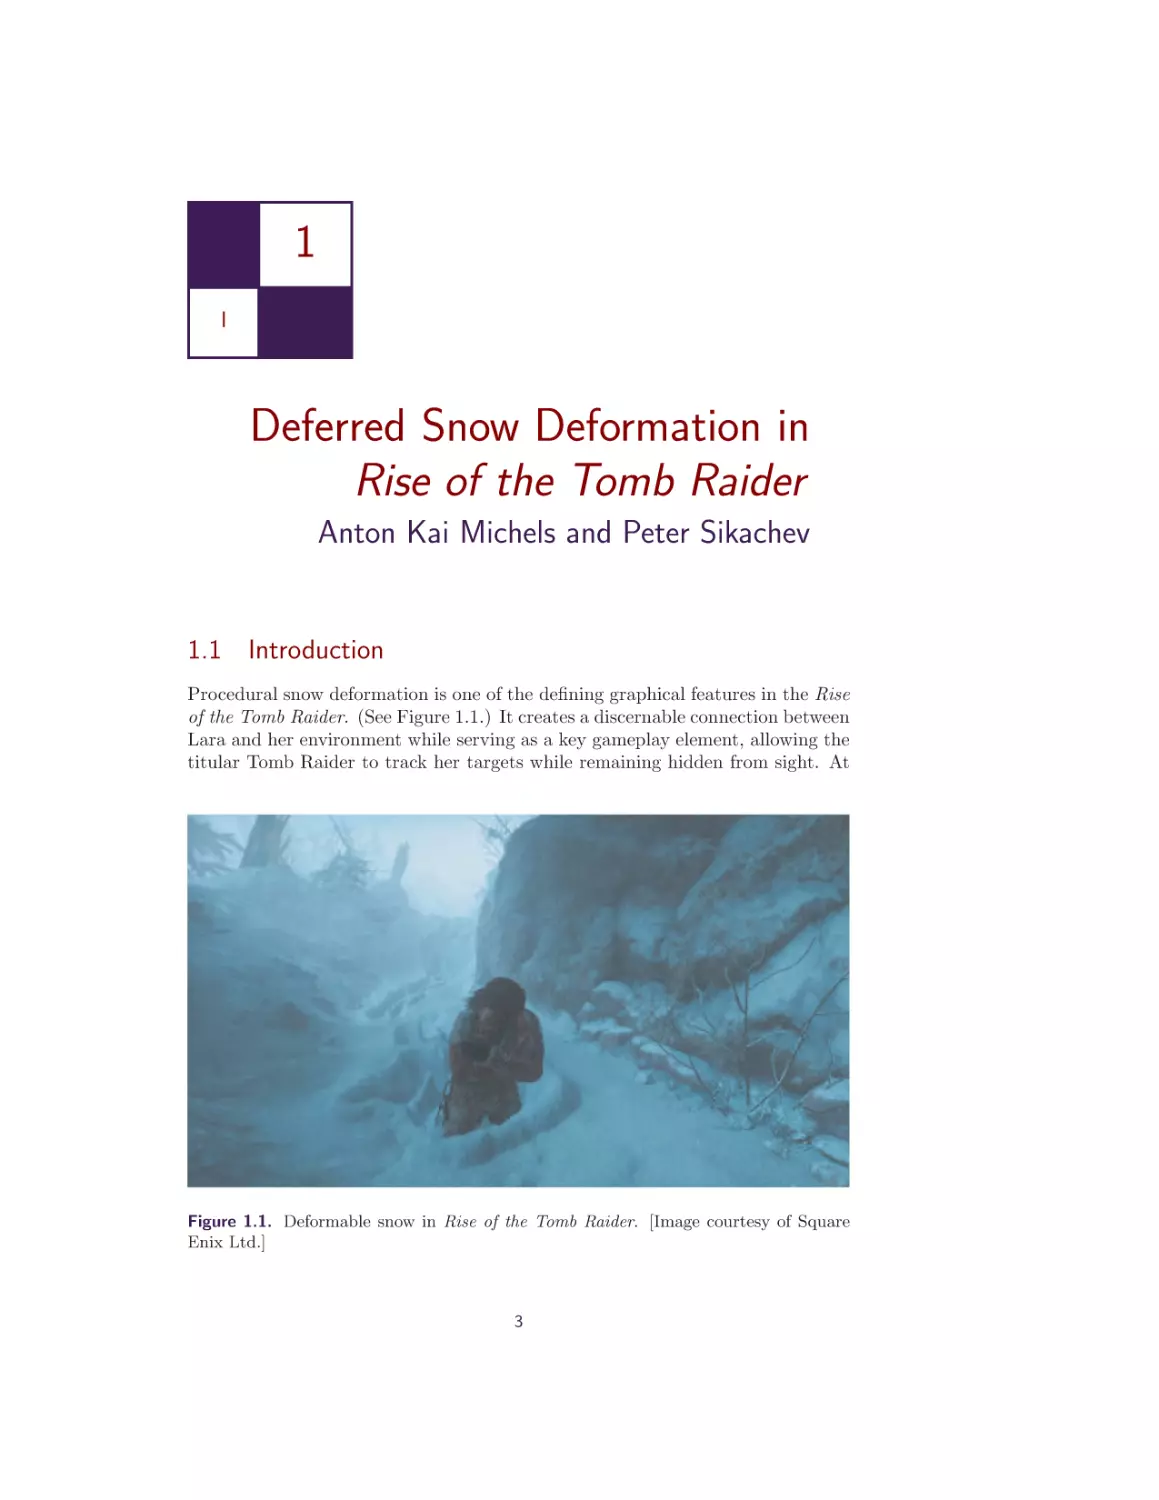 1. Deferred Snow Deformation in Rise of the Tomb Raider